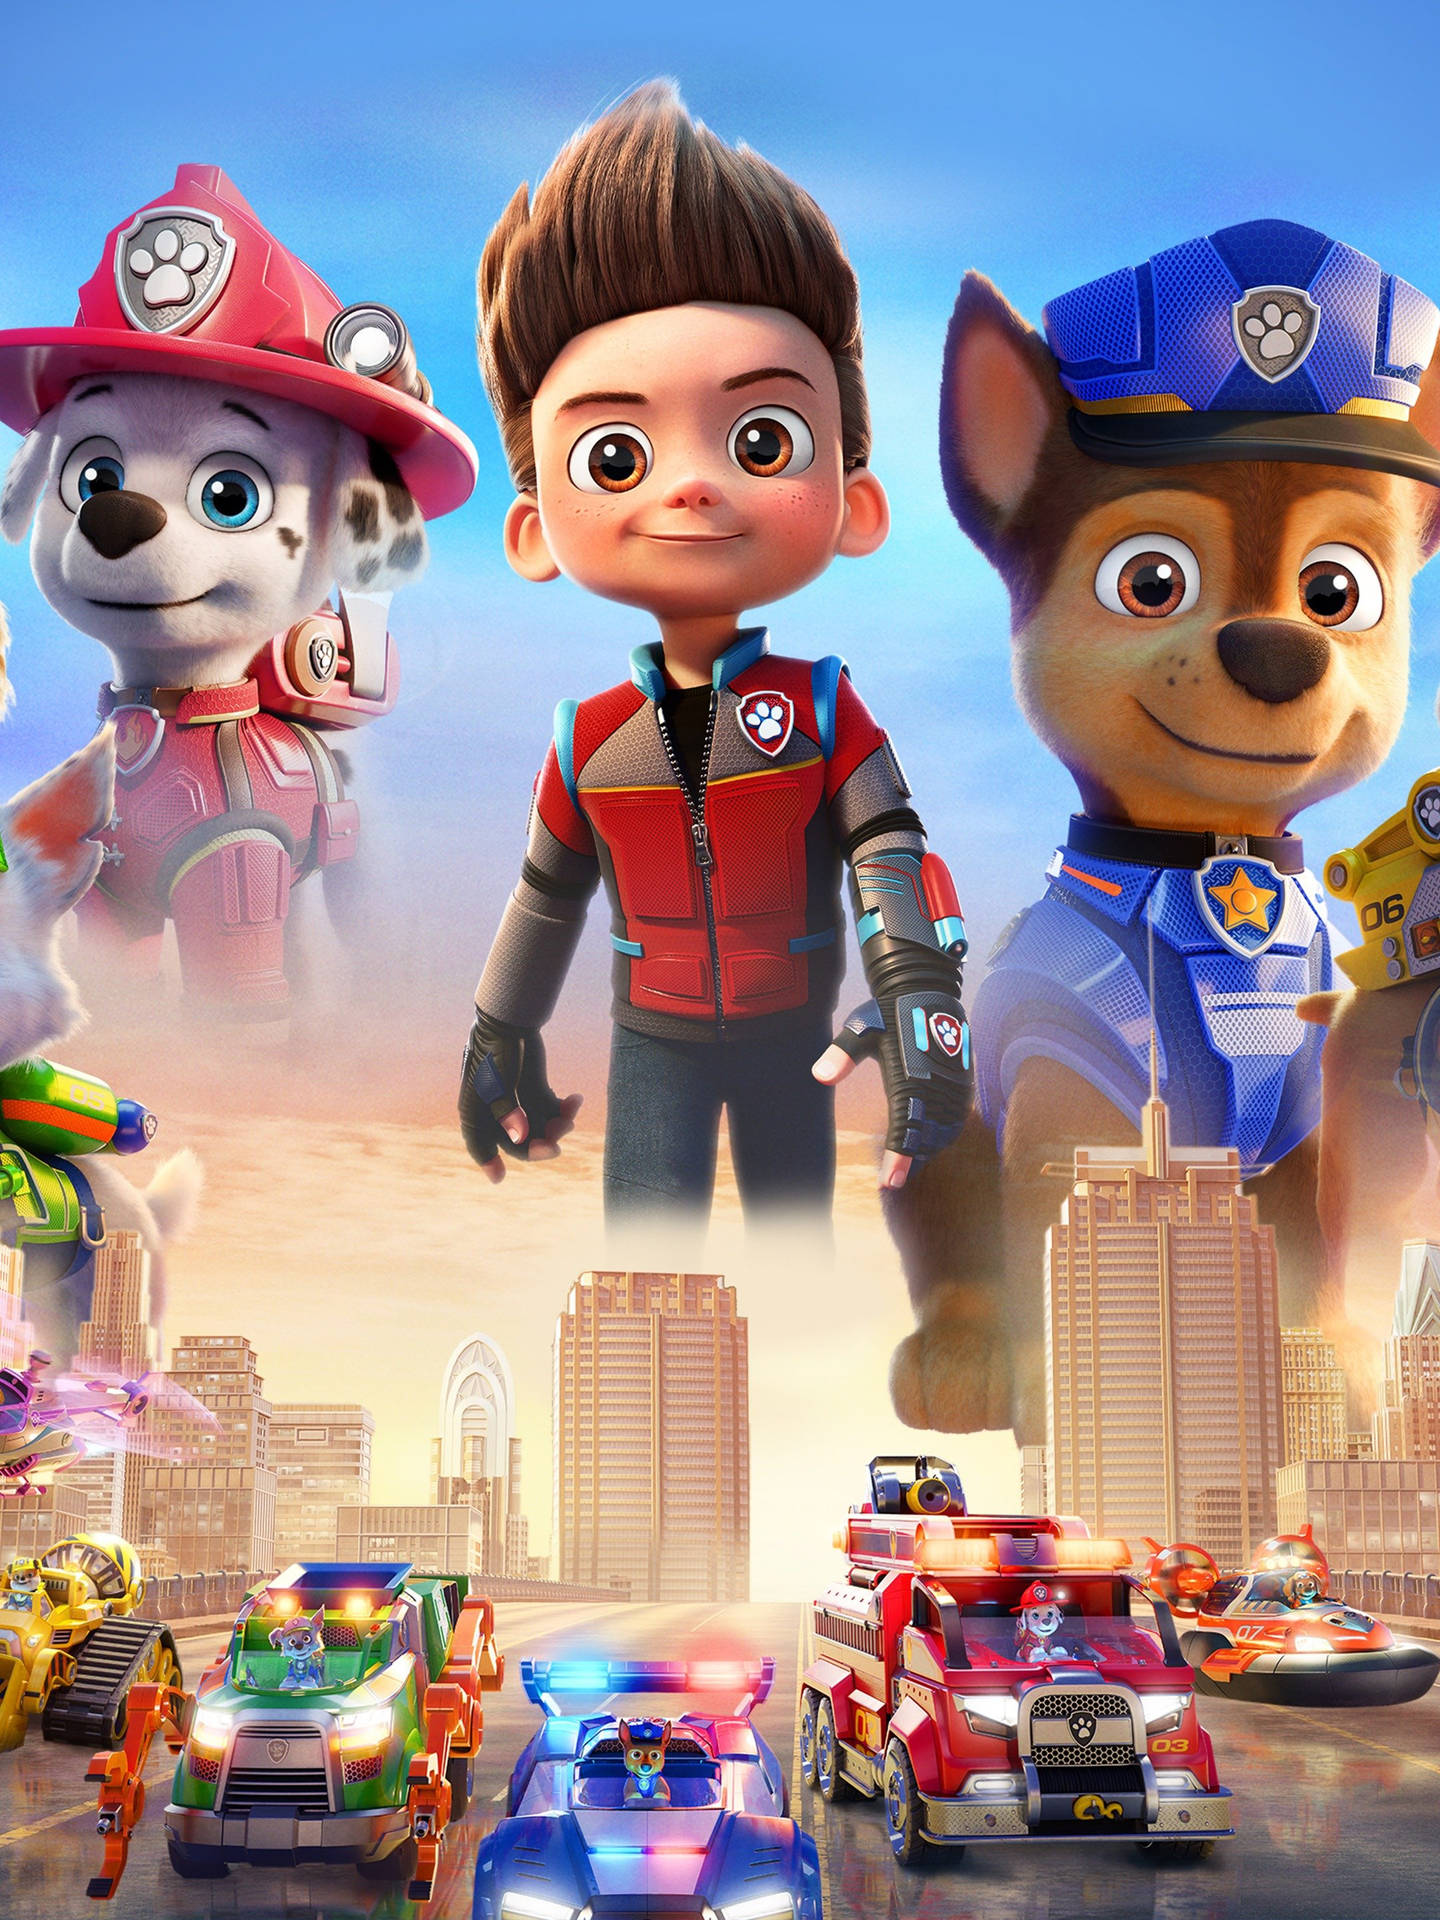 Awesome Paw Patrol The Movie Poster Wallpaper